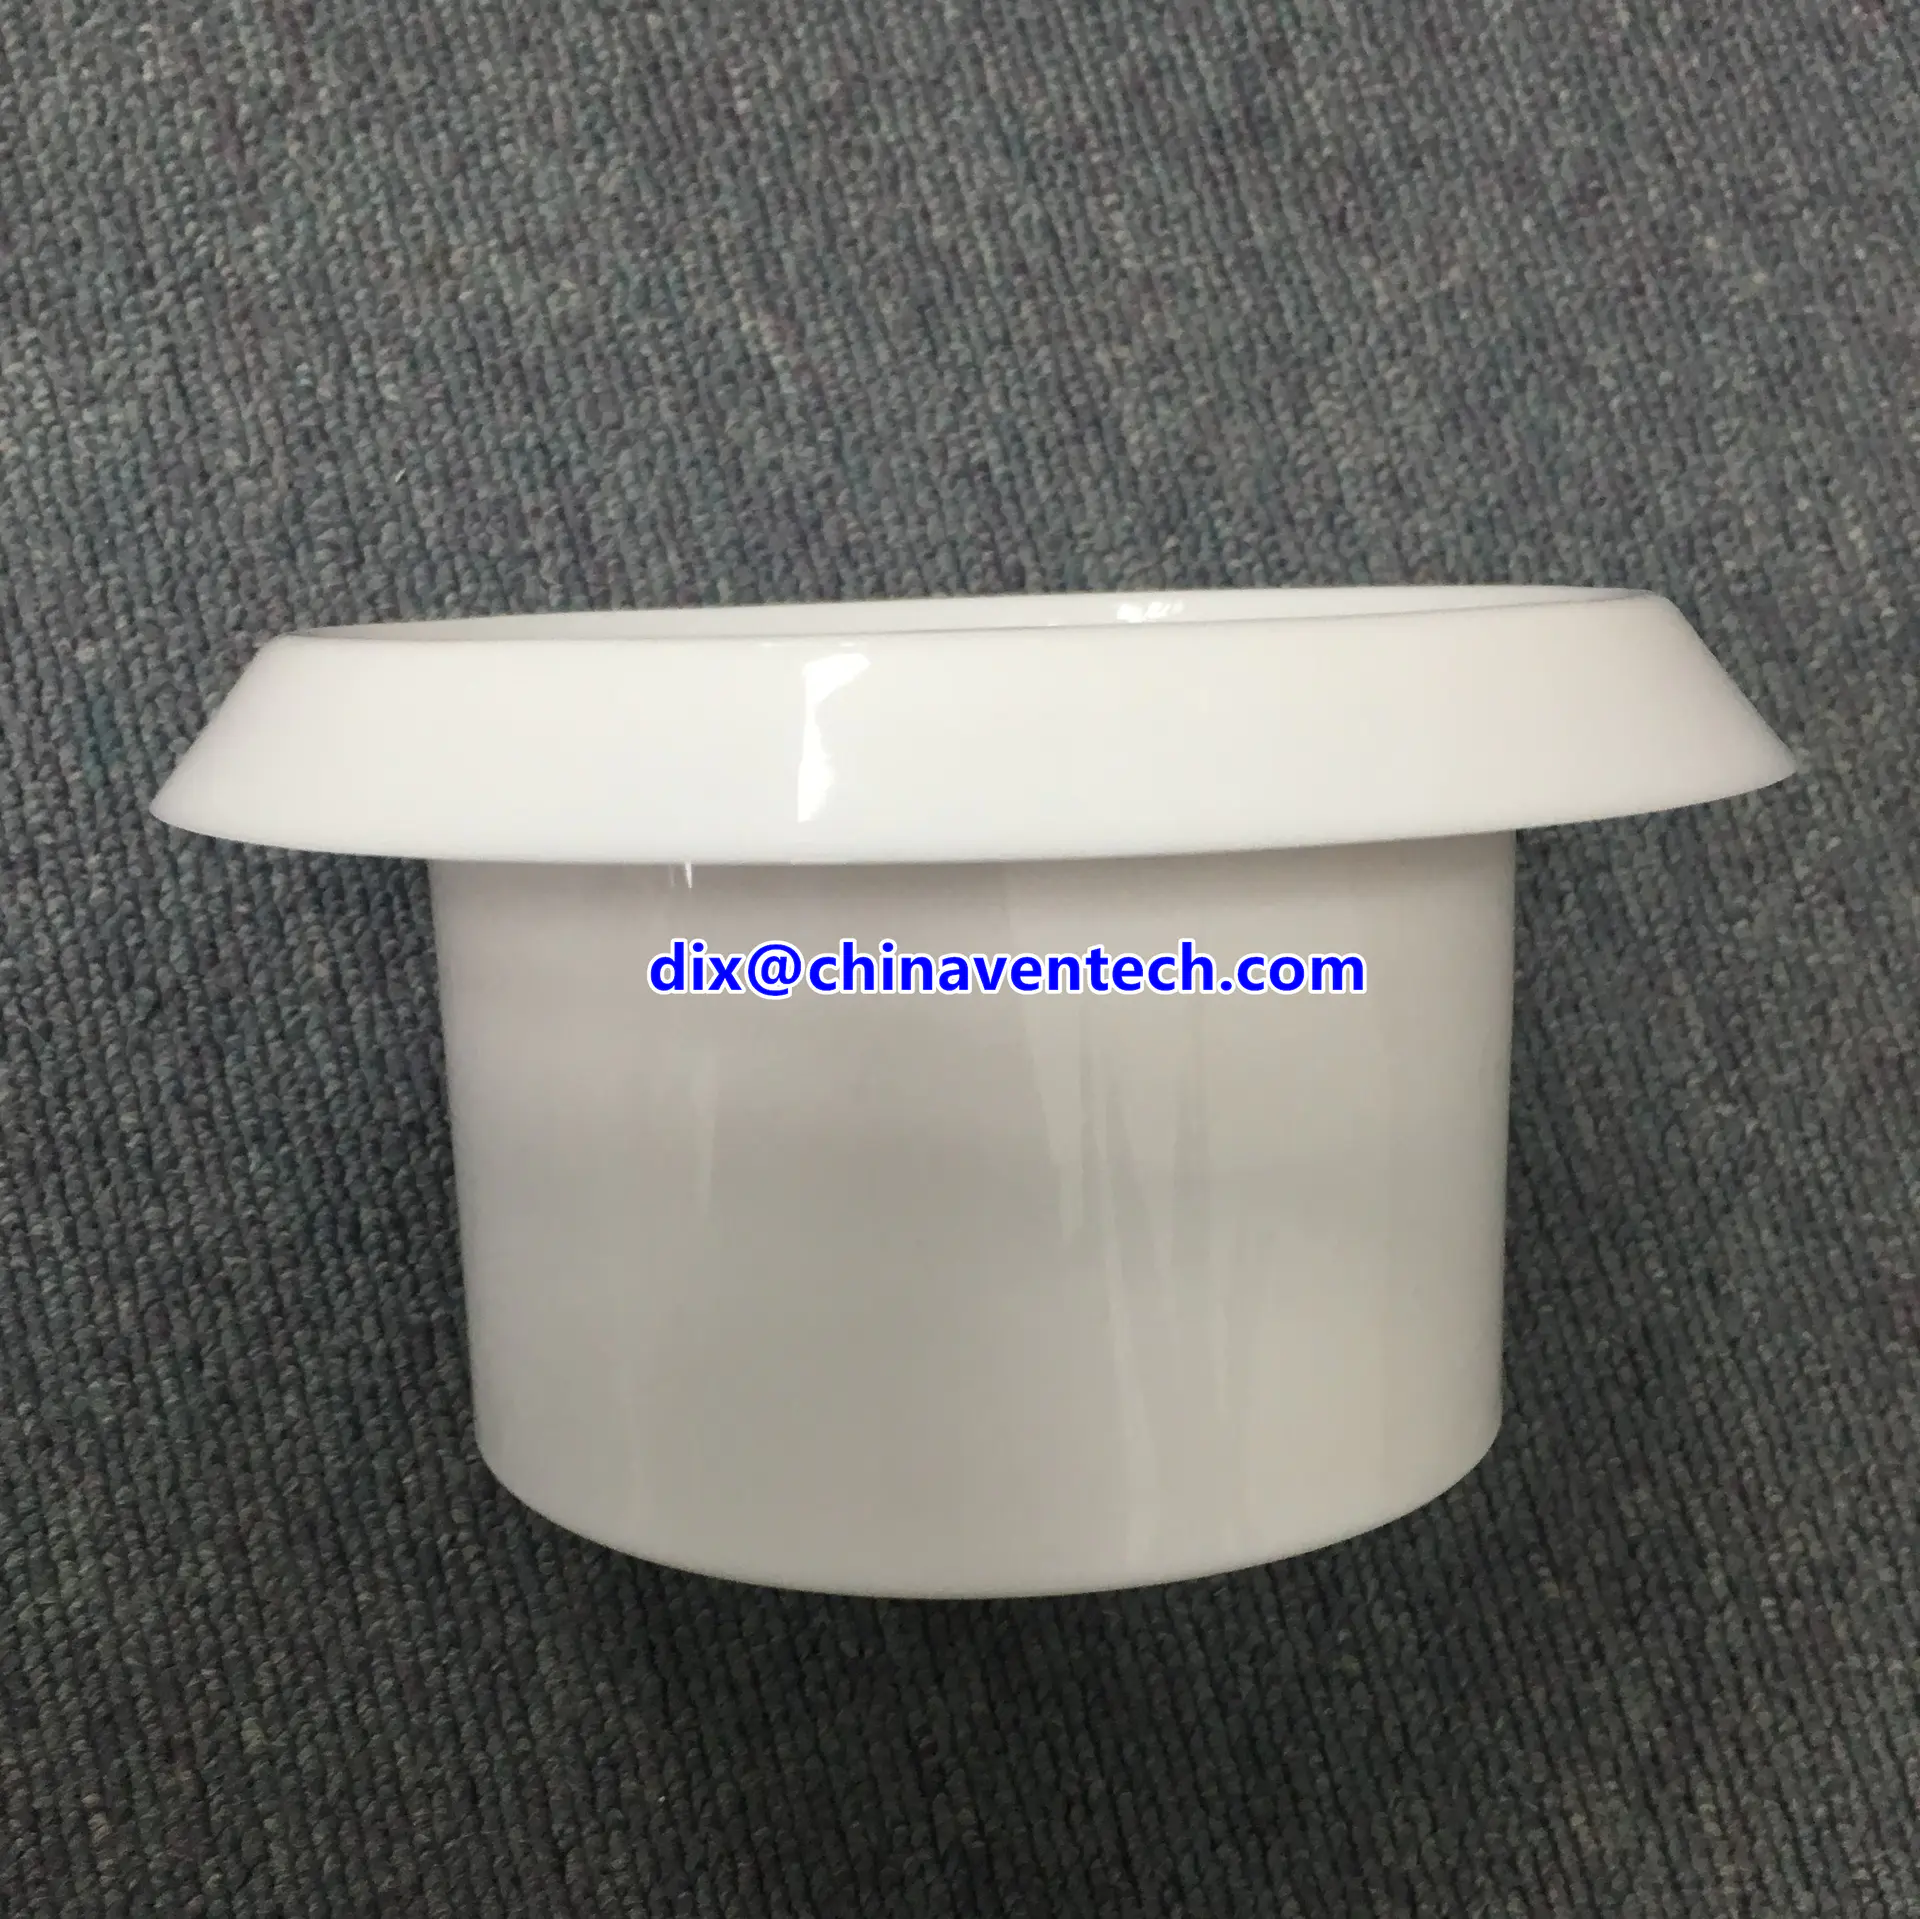 Adjusted Clockwise Round Ceiling Air Vent Regulated Disc Valve Diffuser